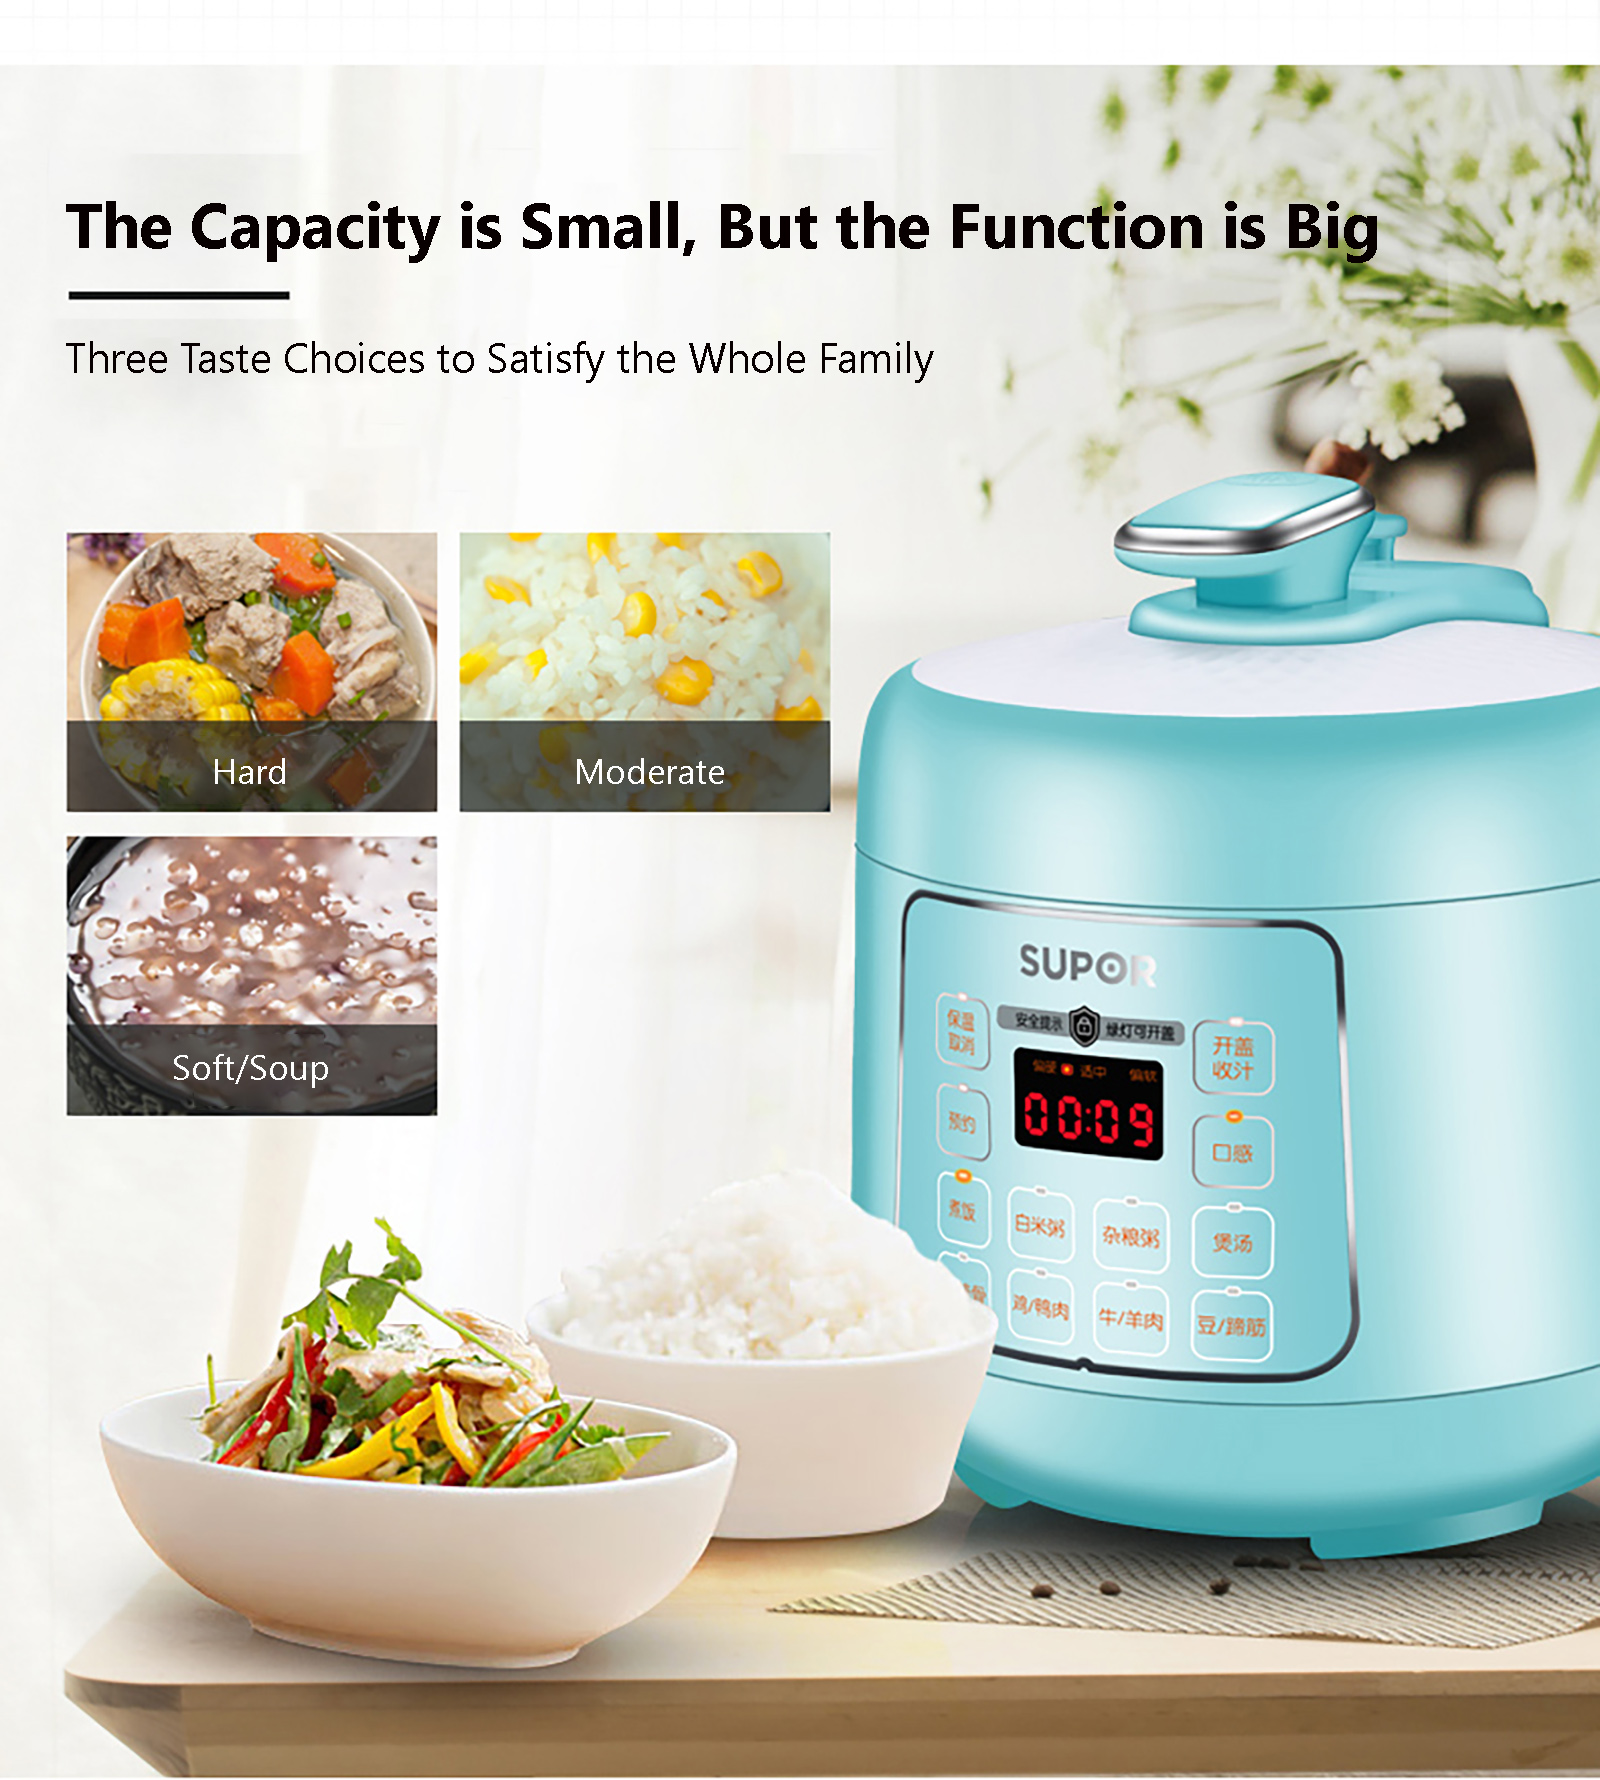 220V Pink Rice Cooker 1.6L Mini Smart Appointment Touch Control Glass Liner  Maternal and Infant for 1-2 People